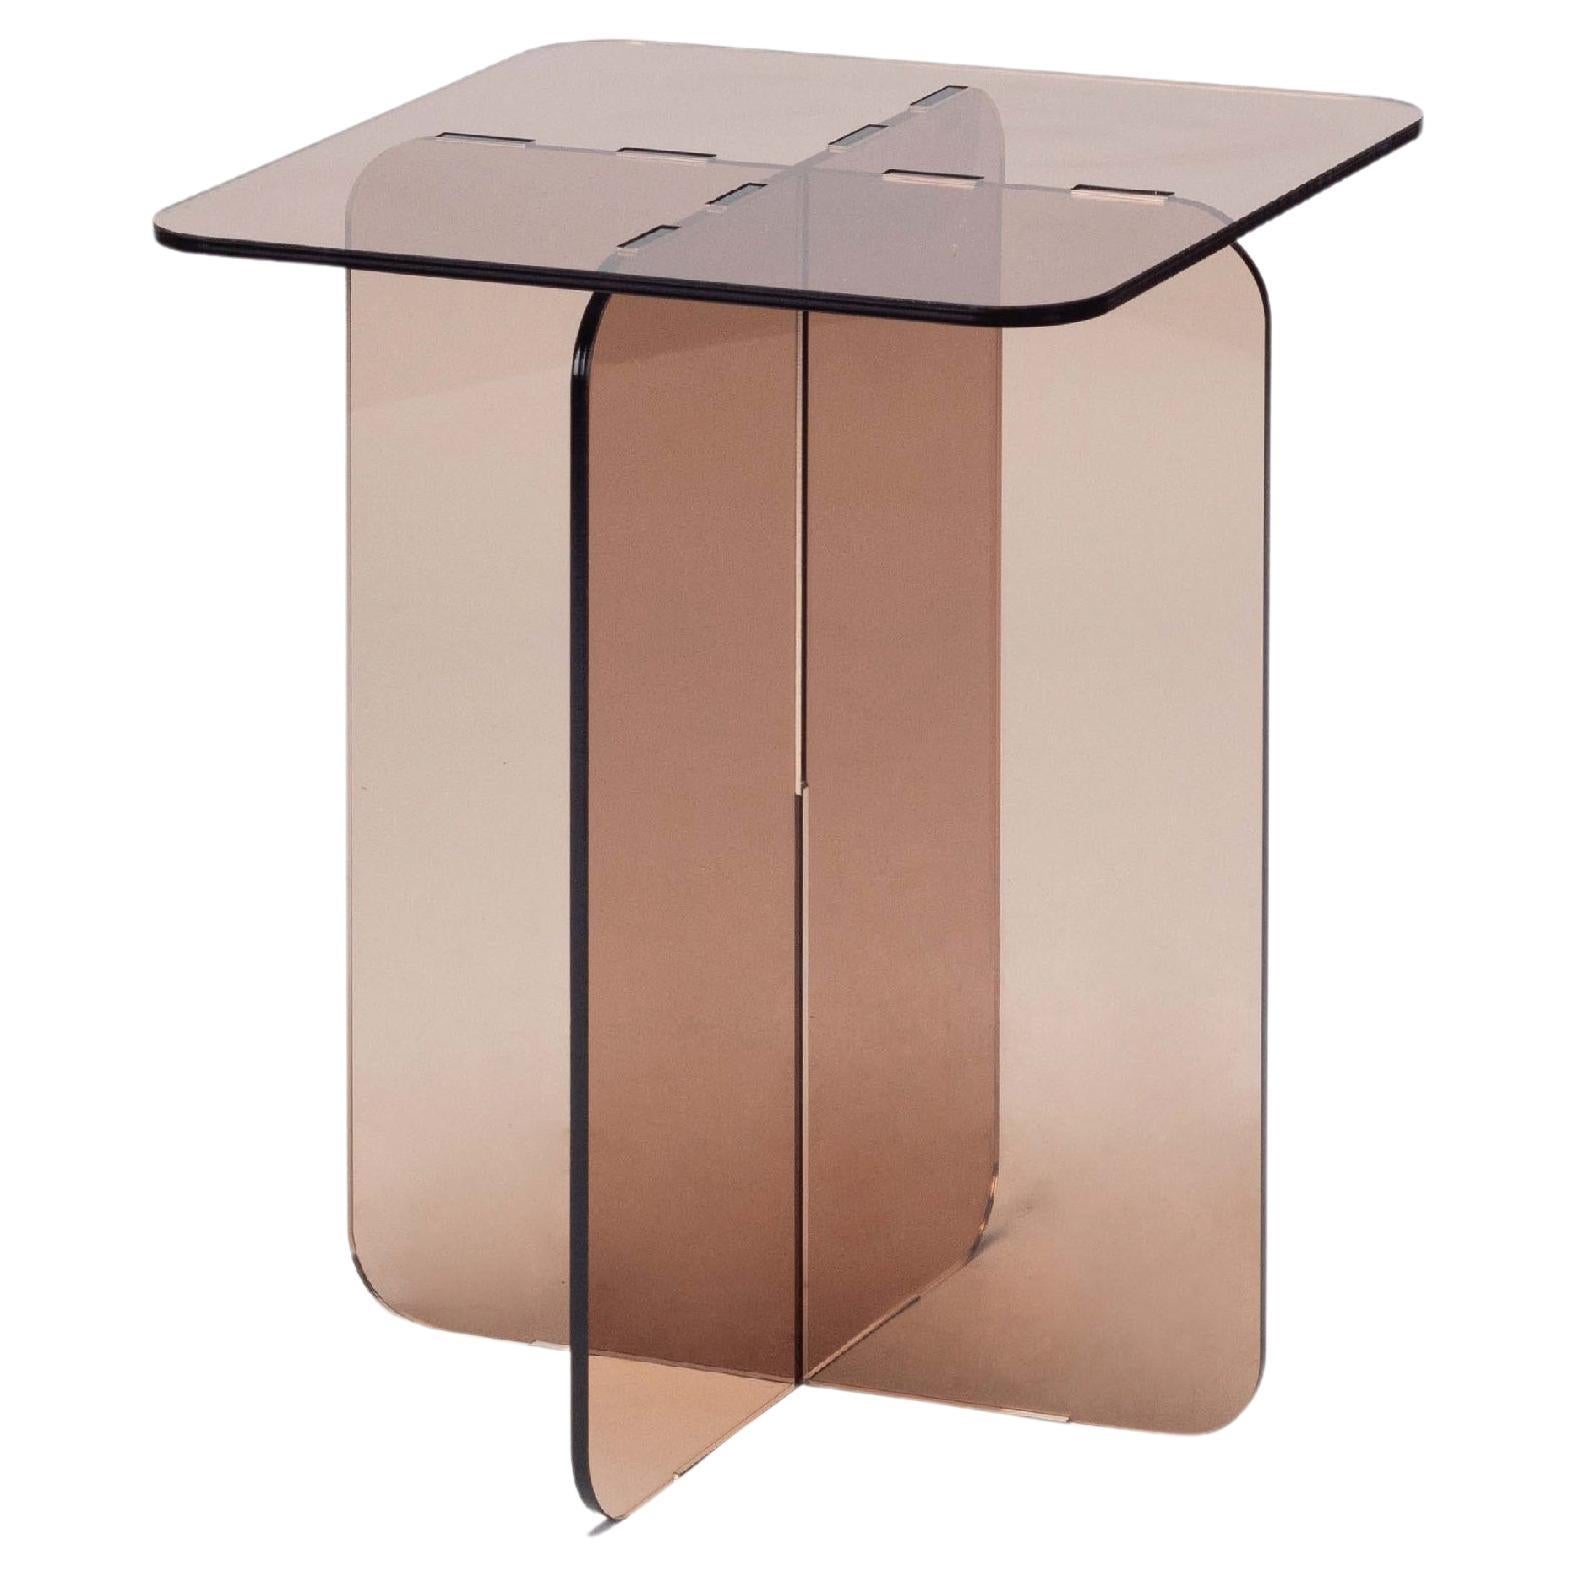 ROMA Table d'appoint Contemporary Acrylic by Ries (Square Top) en vente